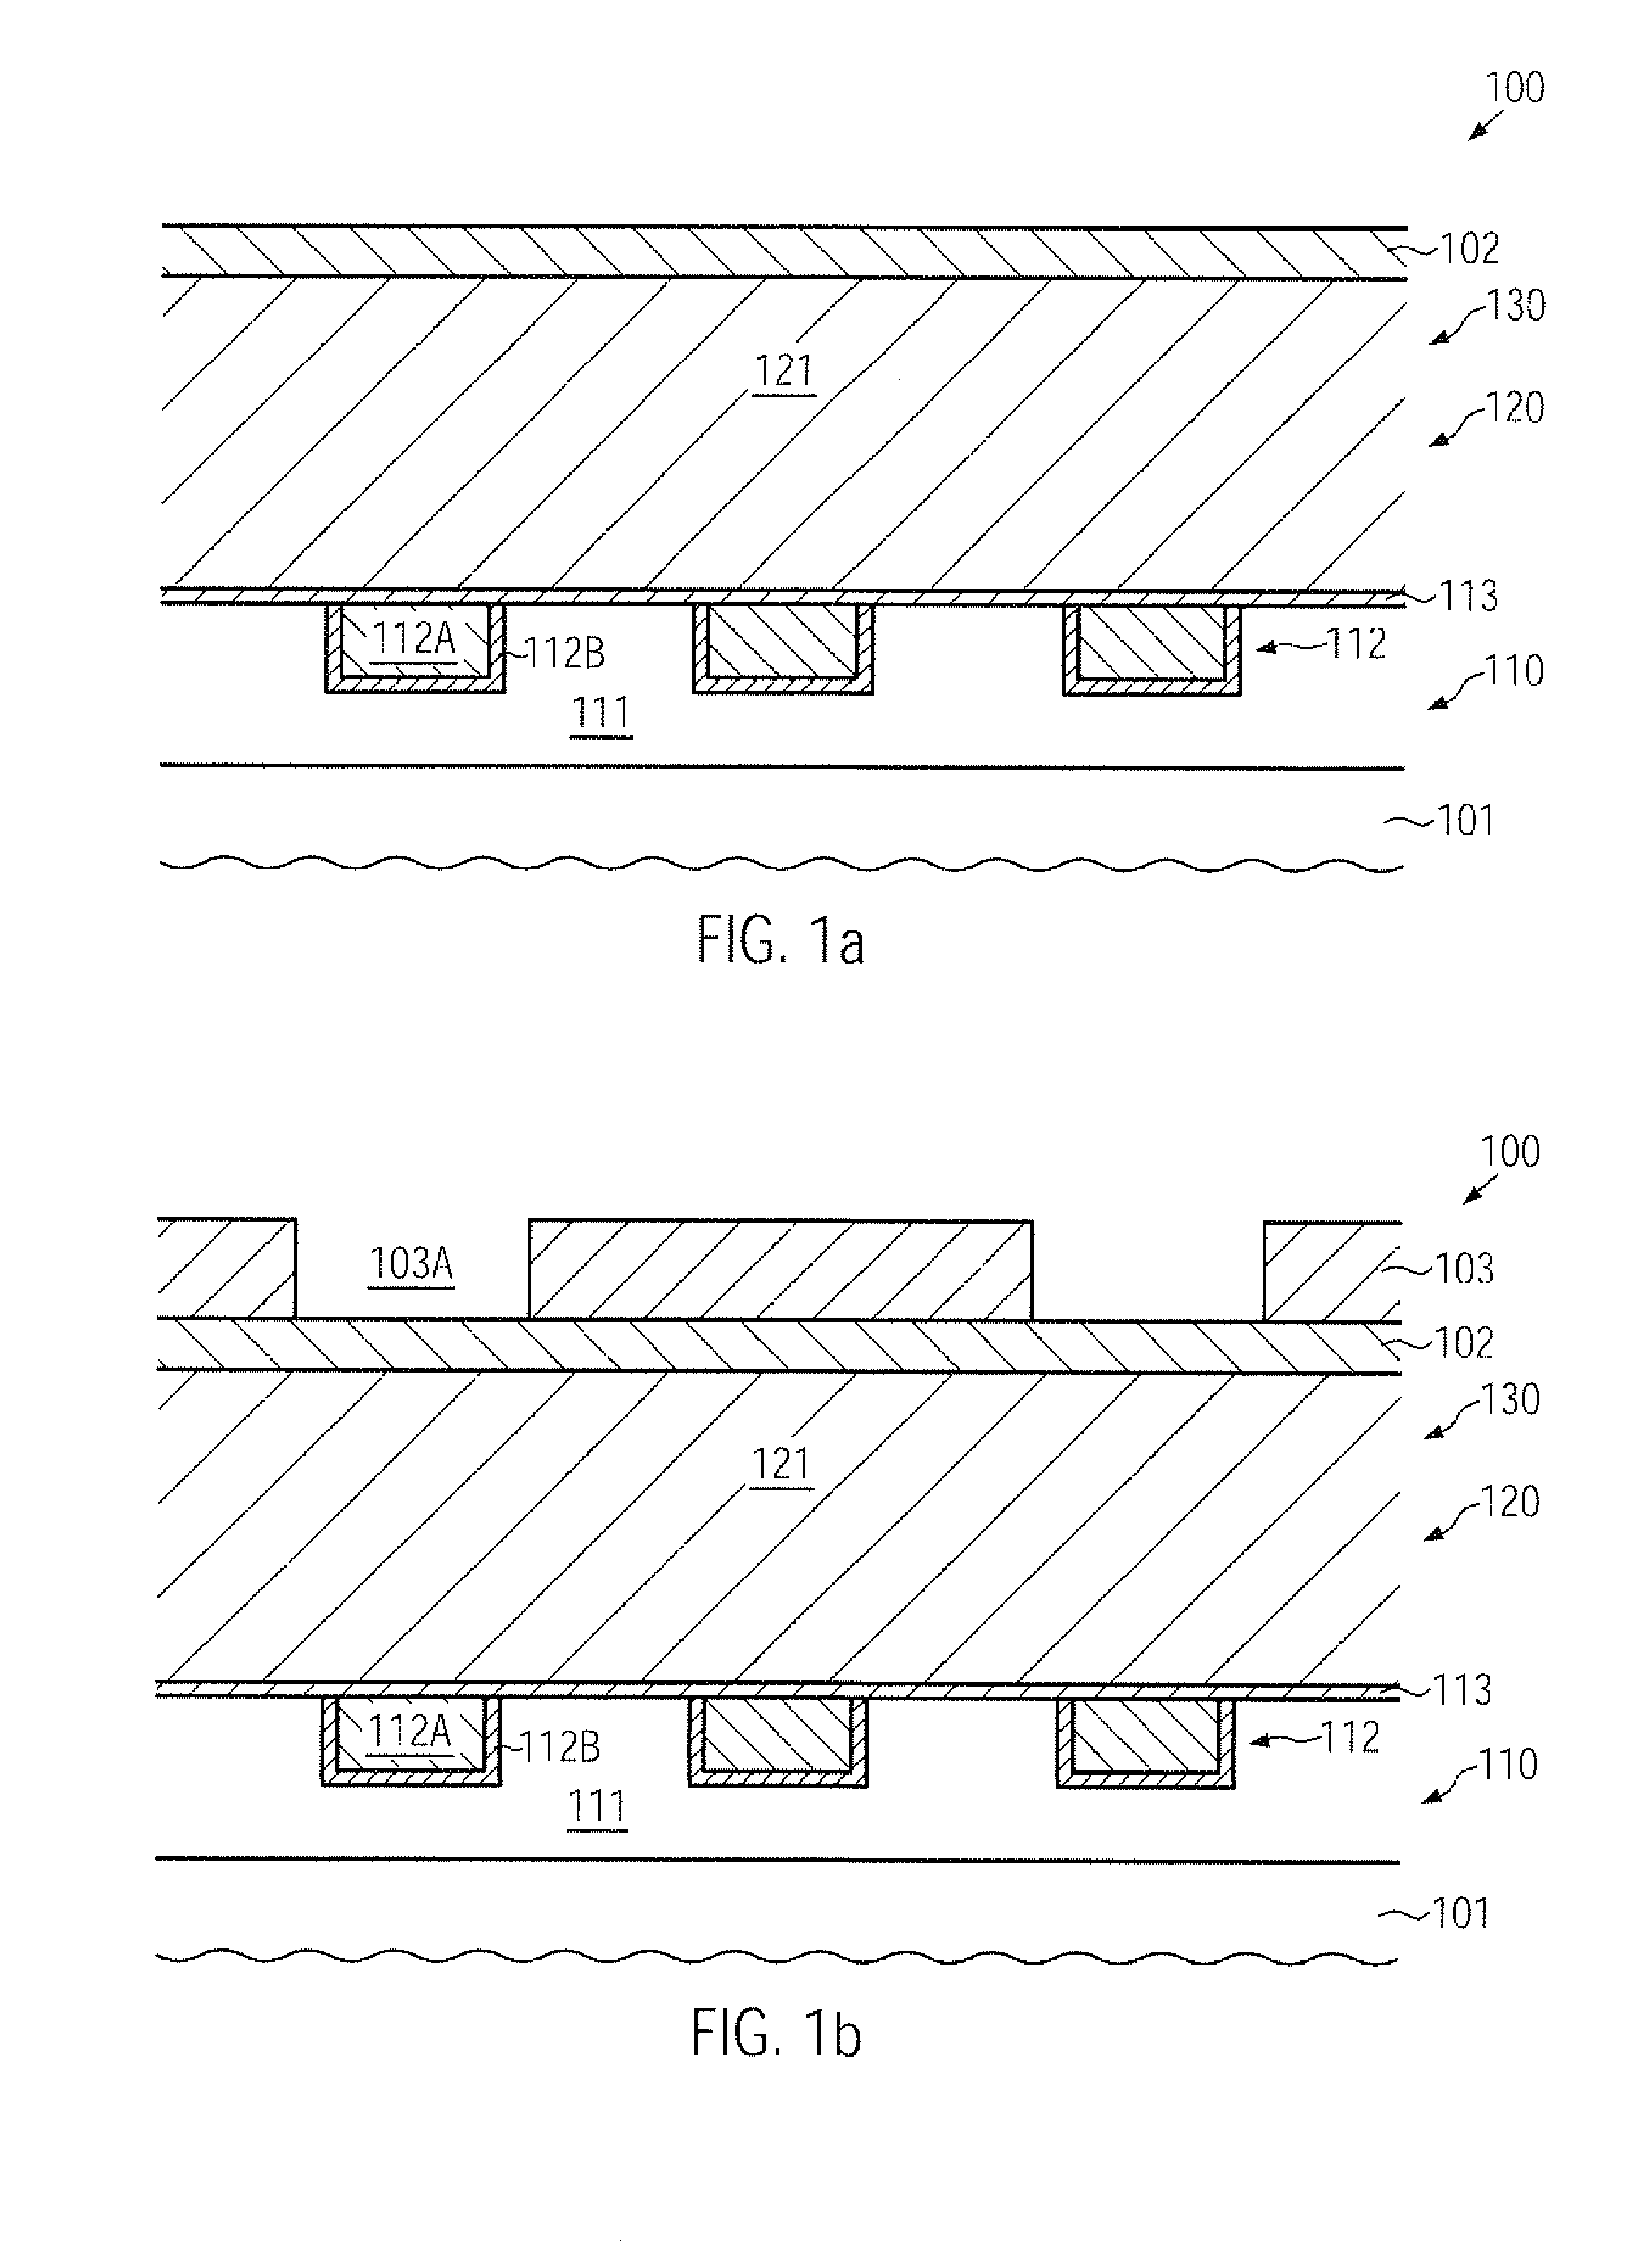 Method of forming a metallization system of a semiconductor device by using a hard mask for defining the via size